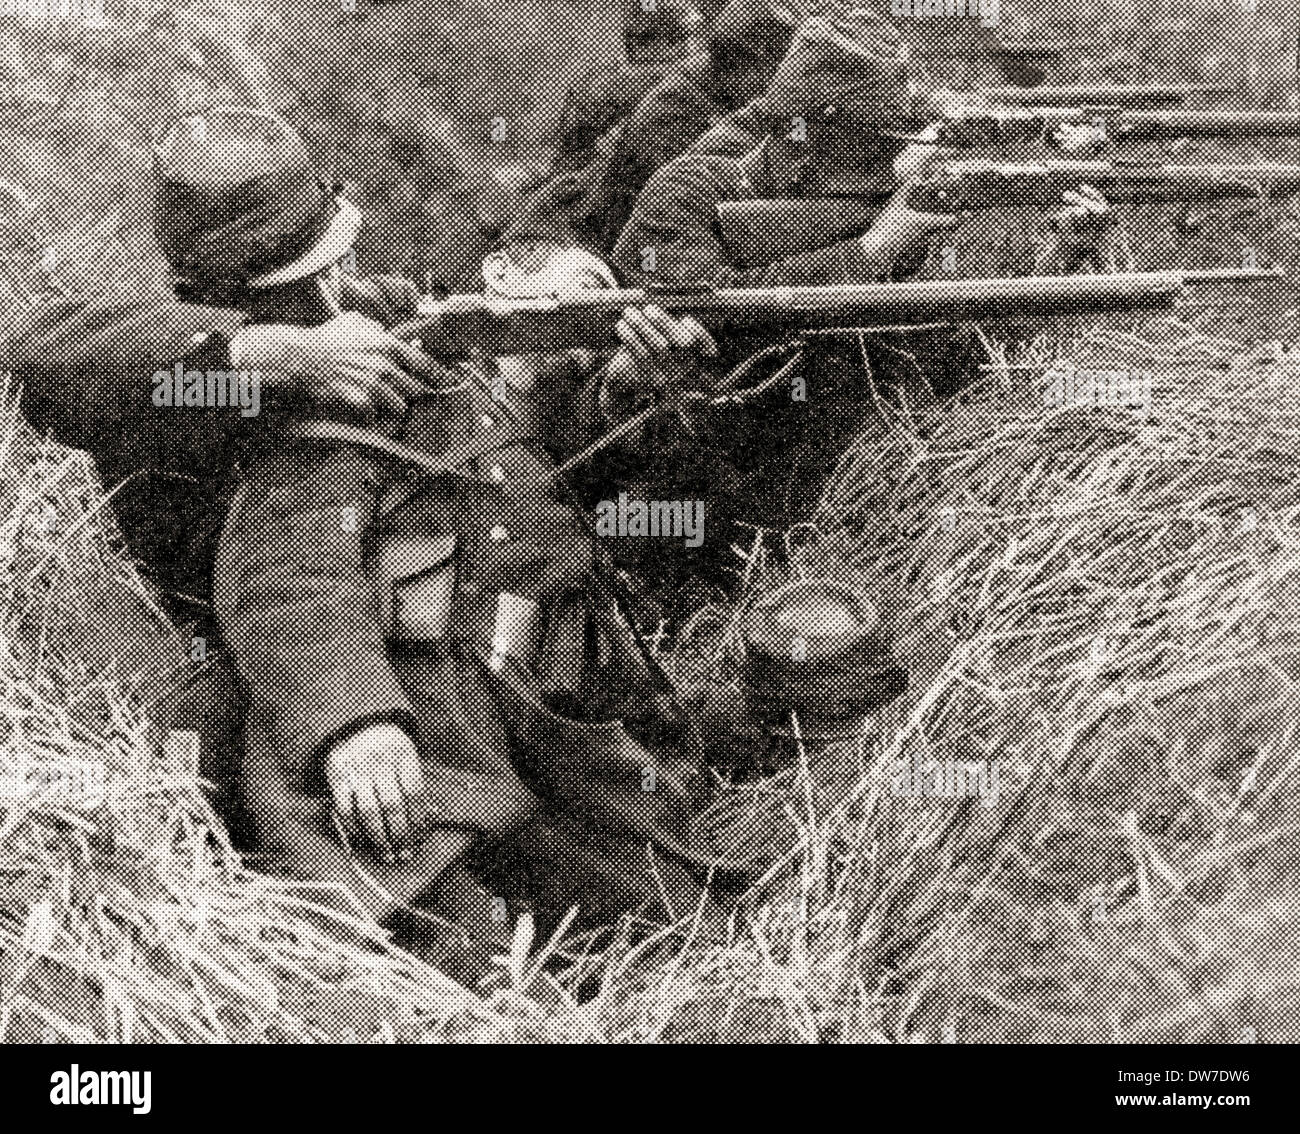 French soldiers fighting in the trenches during WWI. From The War Illustrated Album Deluxe, published 1915. Stock Photo